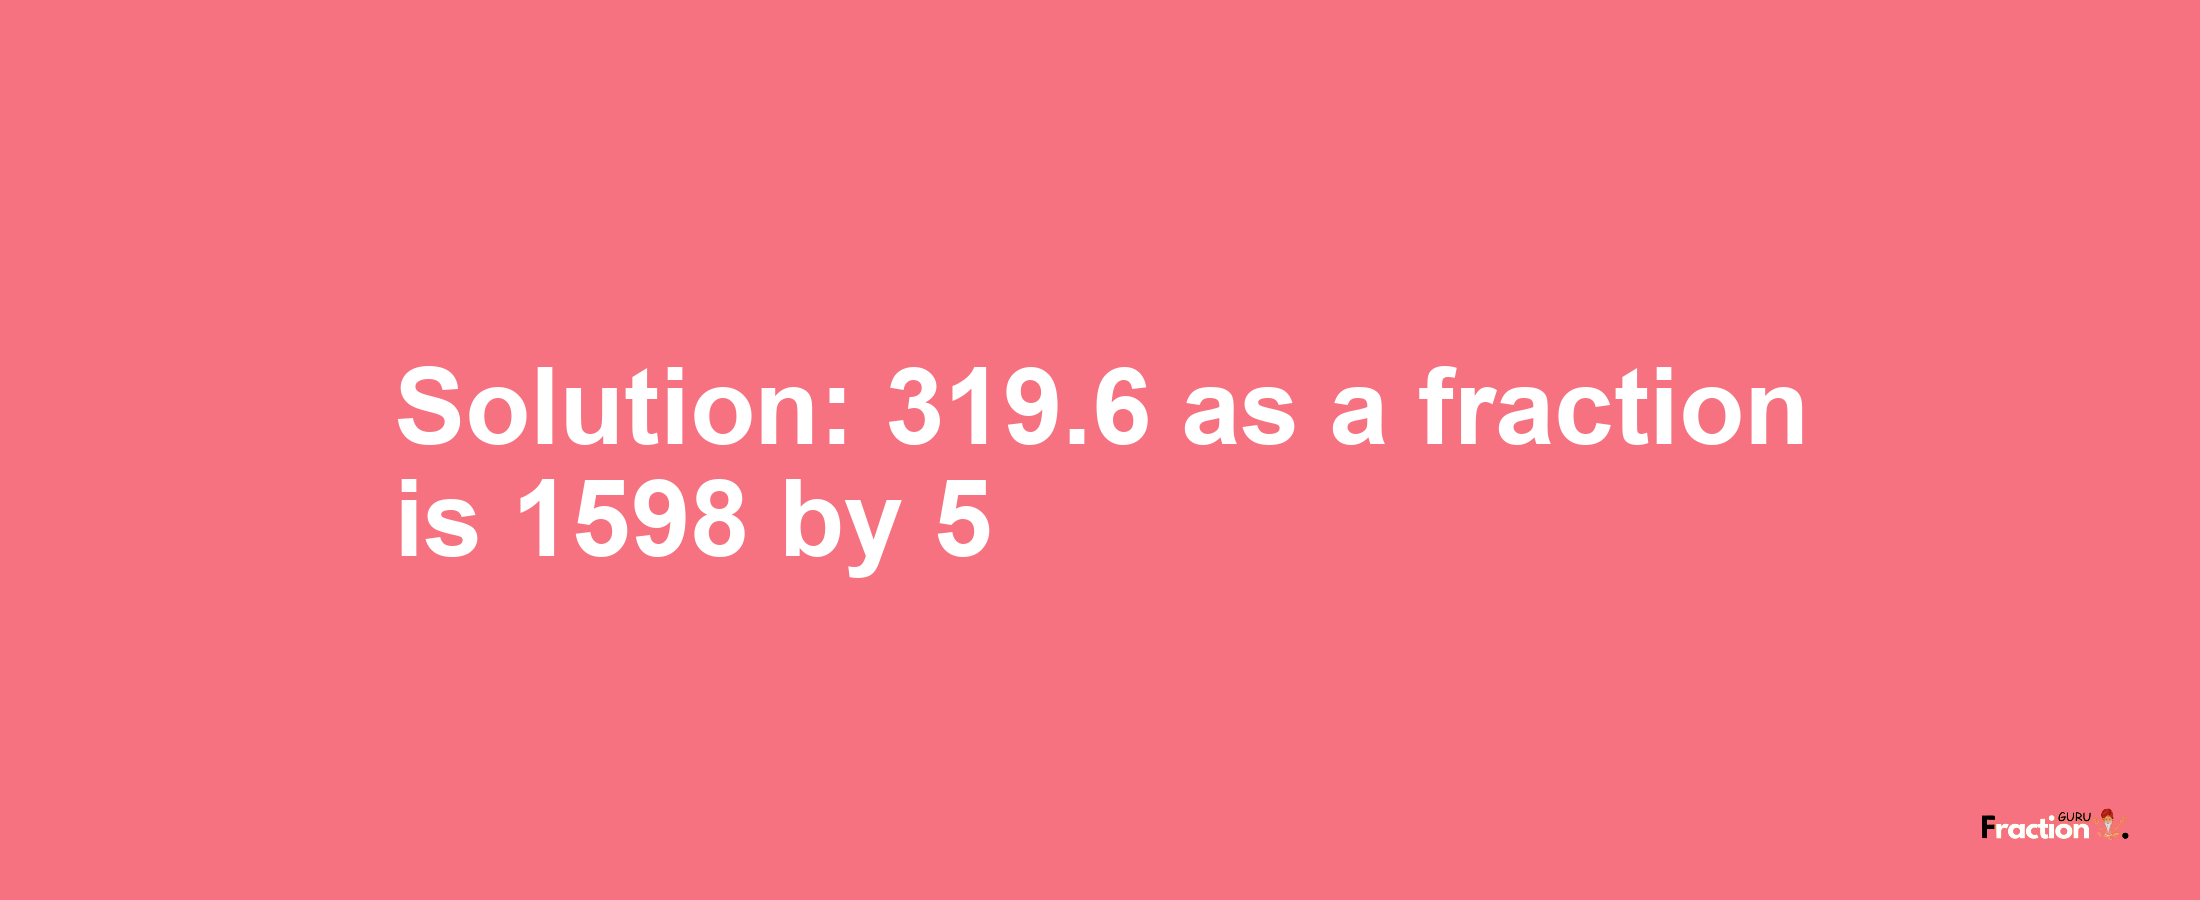 Solution:319.6 as a fraction is 1598/5